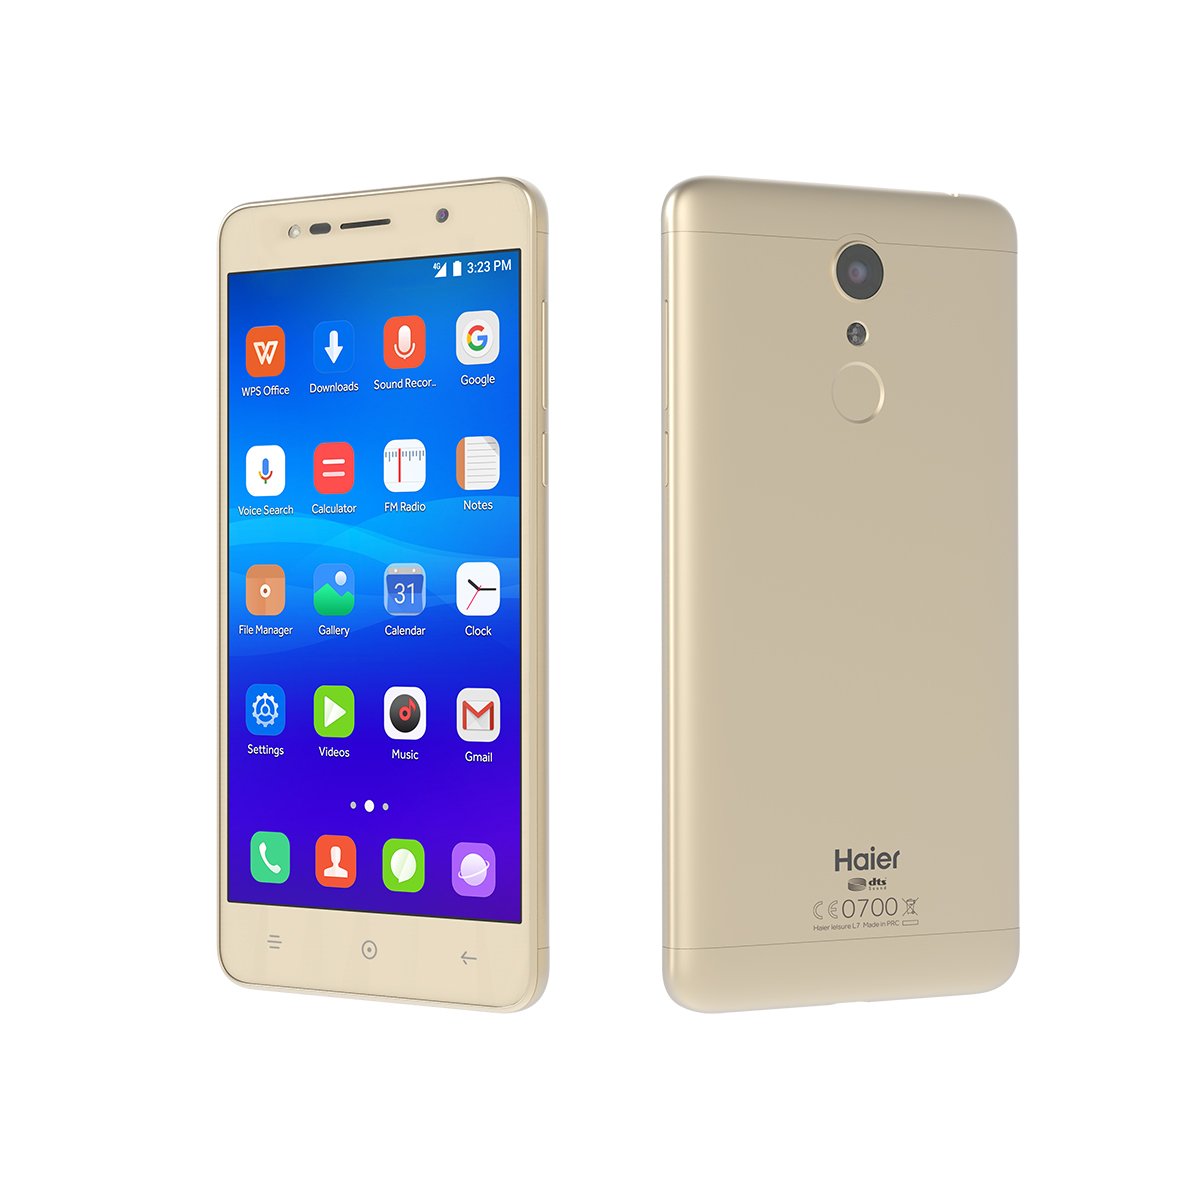 Haier s7 купить. Haier s1331. Haier s7. Haier l1pb26-24rc1(t).